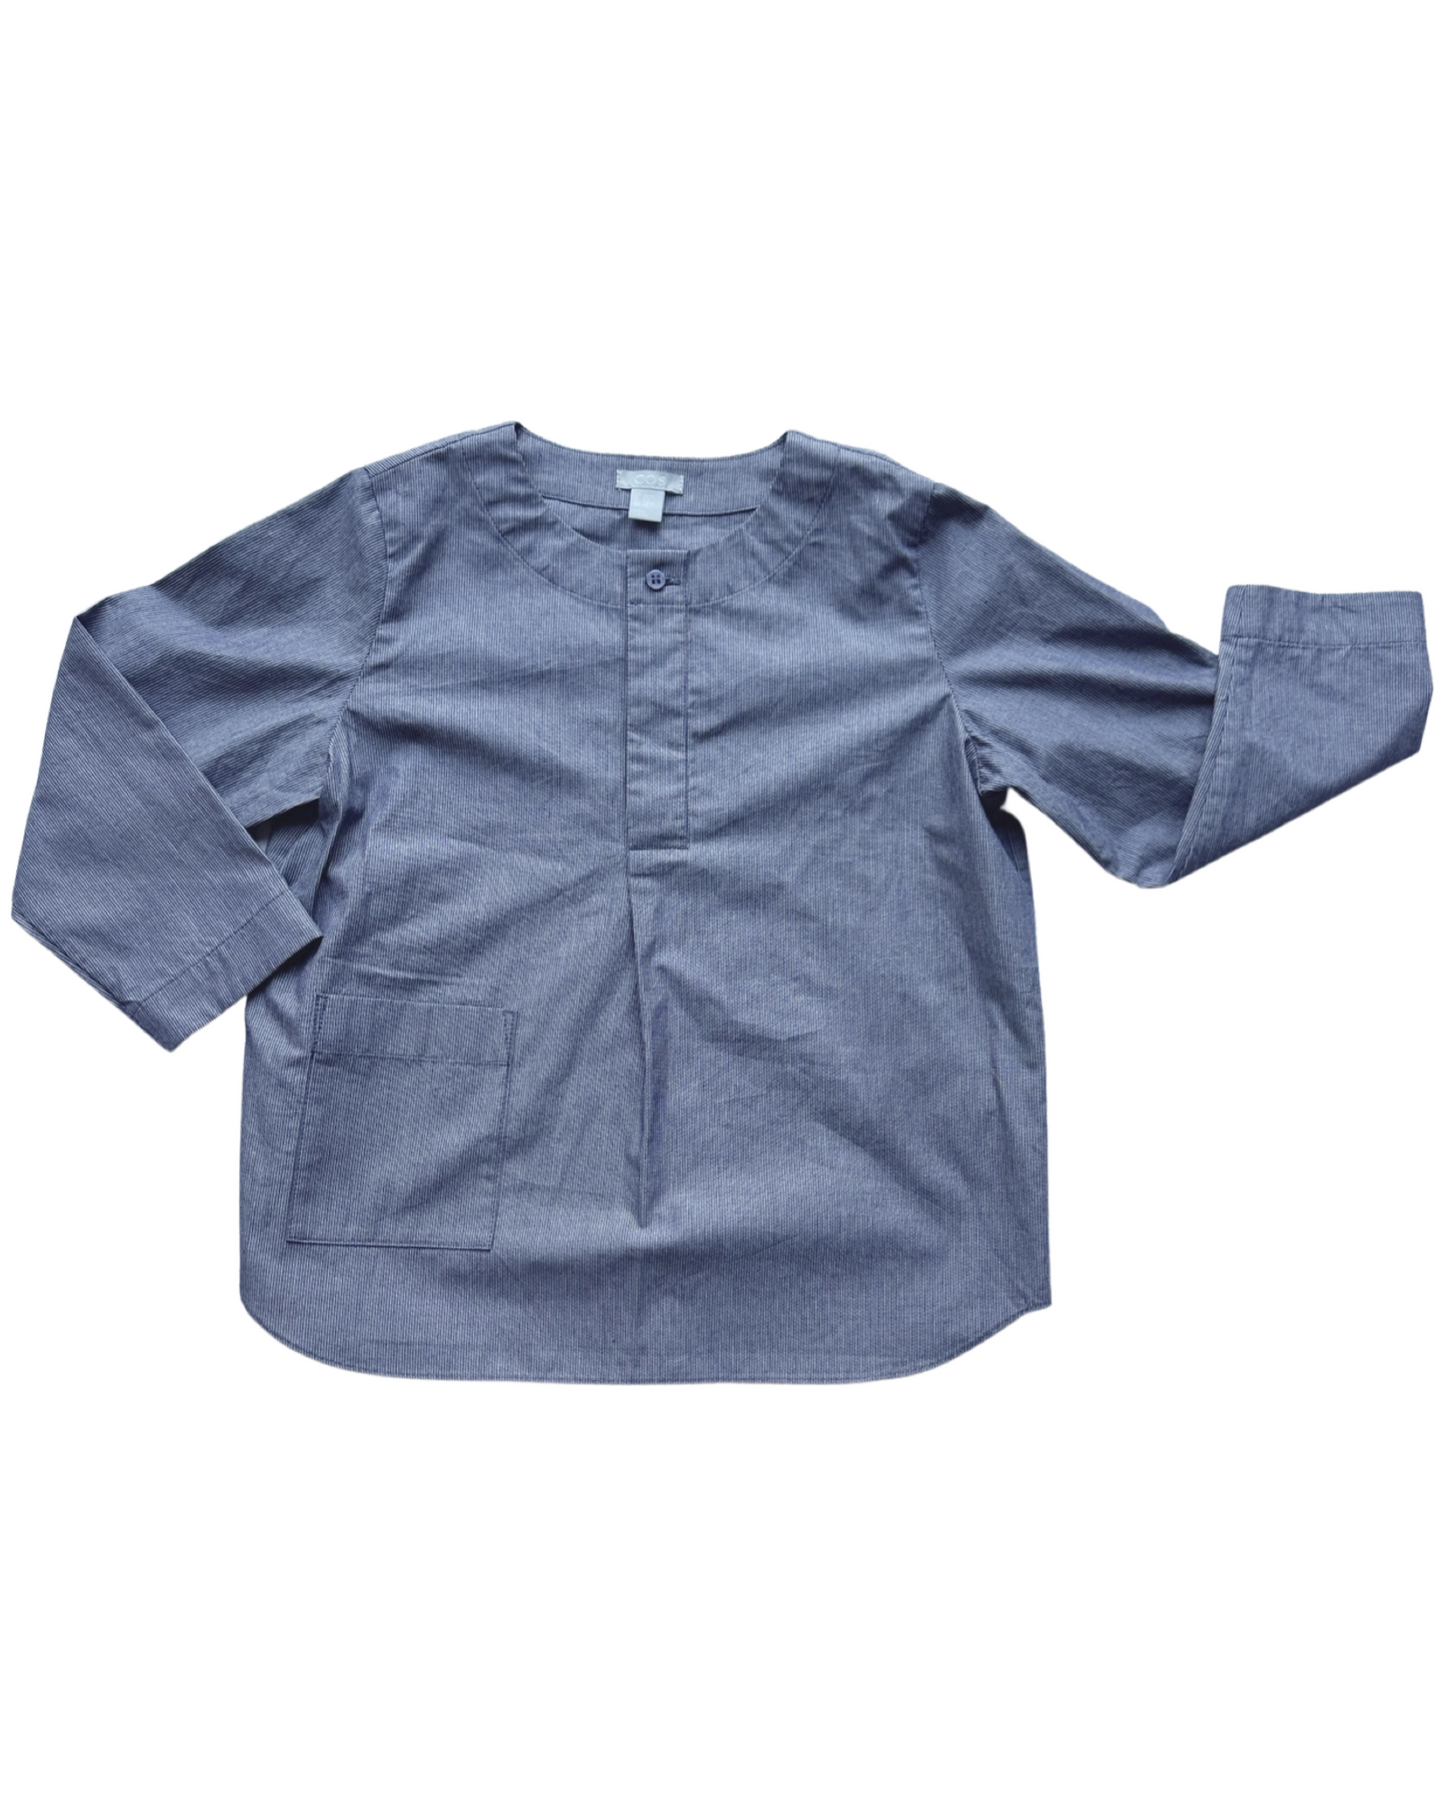 Cos kids woven cotton shirt in blue stripe (size 2-4yrs)